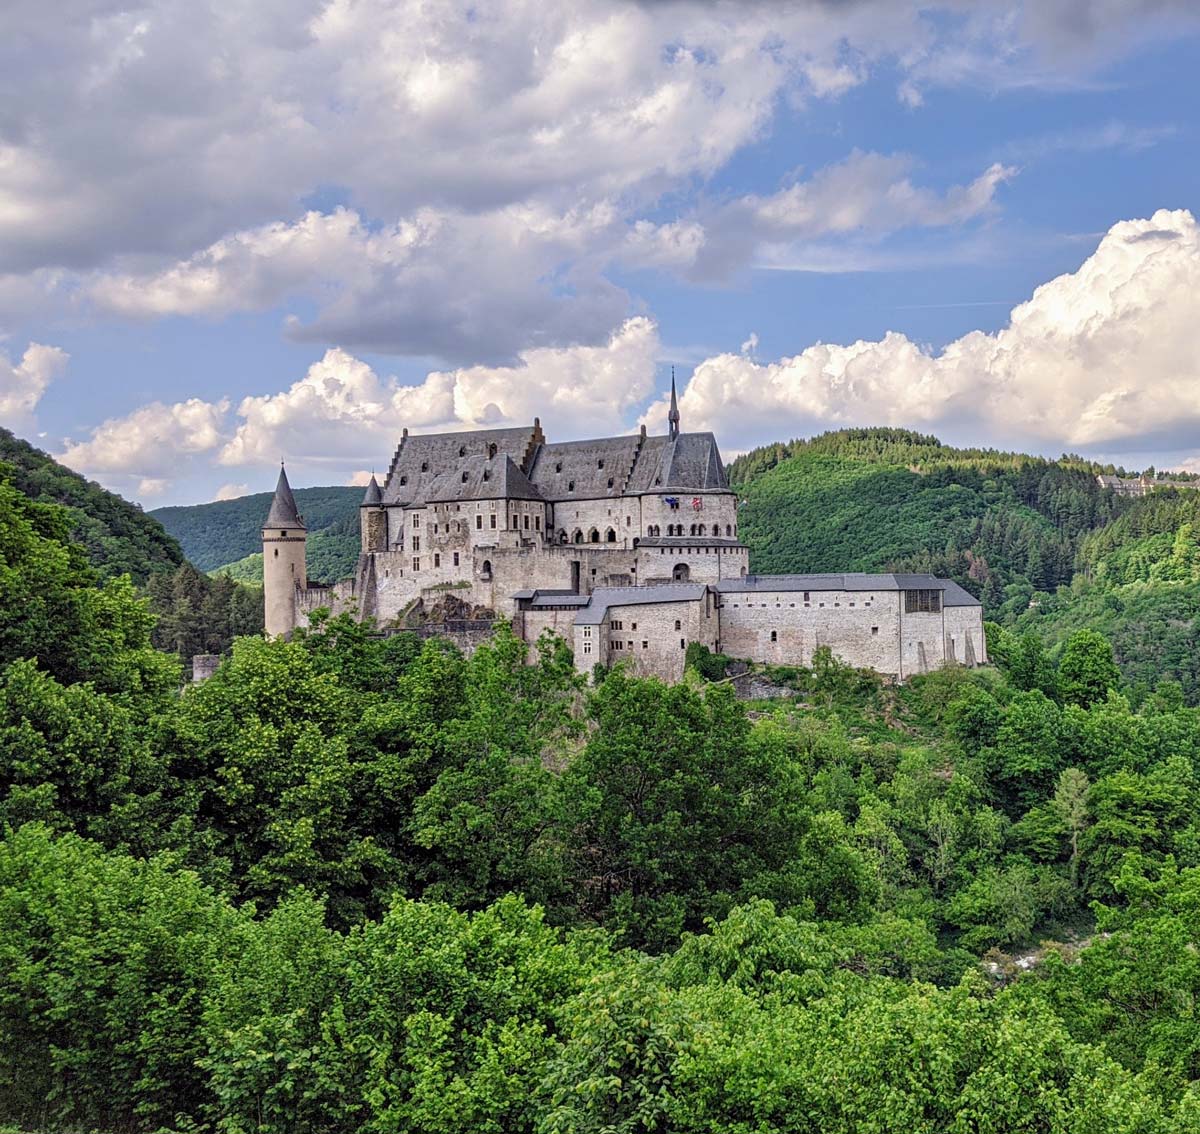 The Castle of Vianden, in the forested hills of the Ardennes, Luxembourg